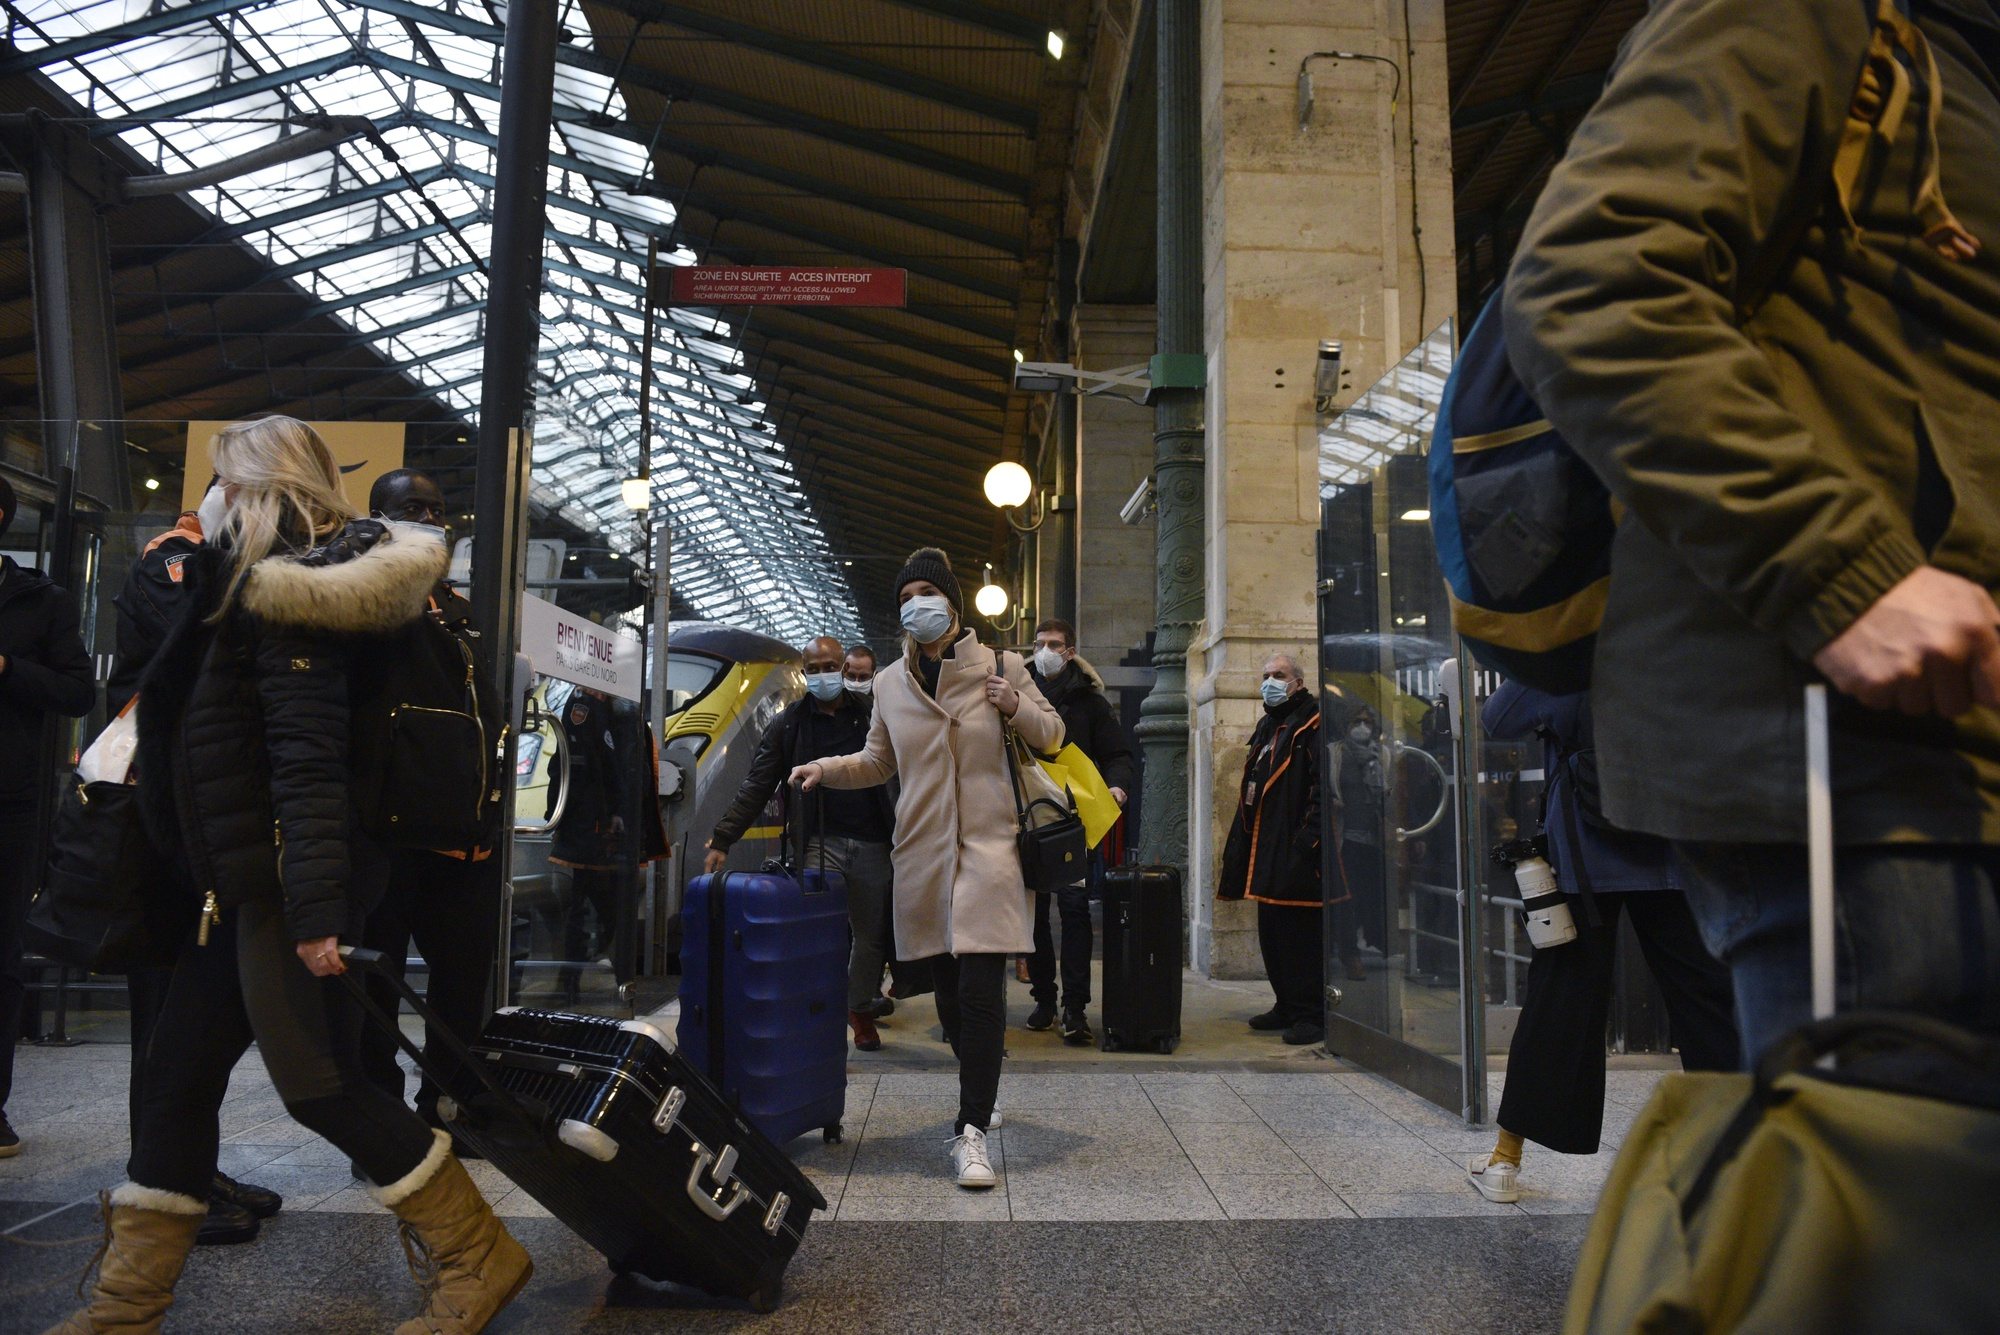 epa08901149 Passengers from London arrive at the Eurostar terminal in Gare du Nord train station in Paris, France, 23 December 2020. French government suspended the ban on air and rail travel from the UK for French residents following news of the new variant Covid-19 that has spread rapidly across London and south-east England. Most of the countries in the EU have suspended flights to and from the UK in the light of this mutated coronavirus strain.  EPA/JULIEN DE ROSA